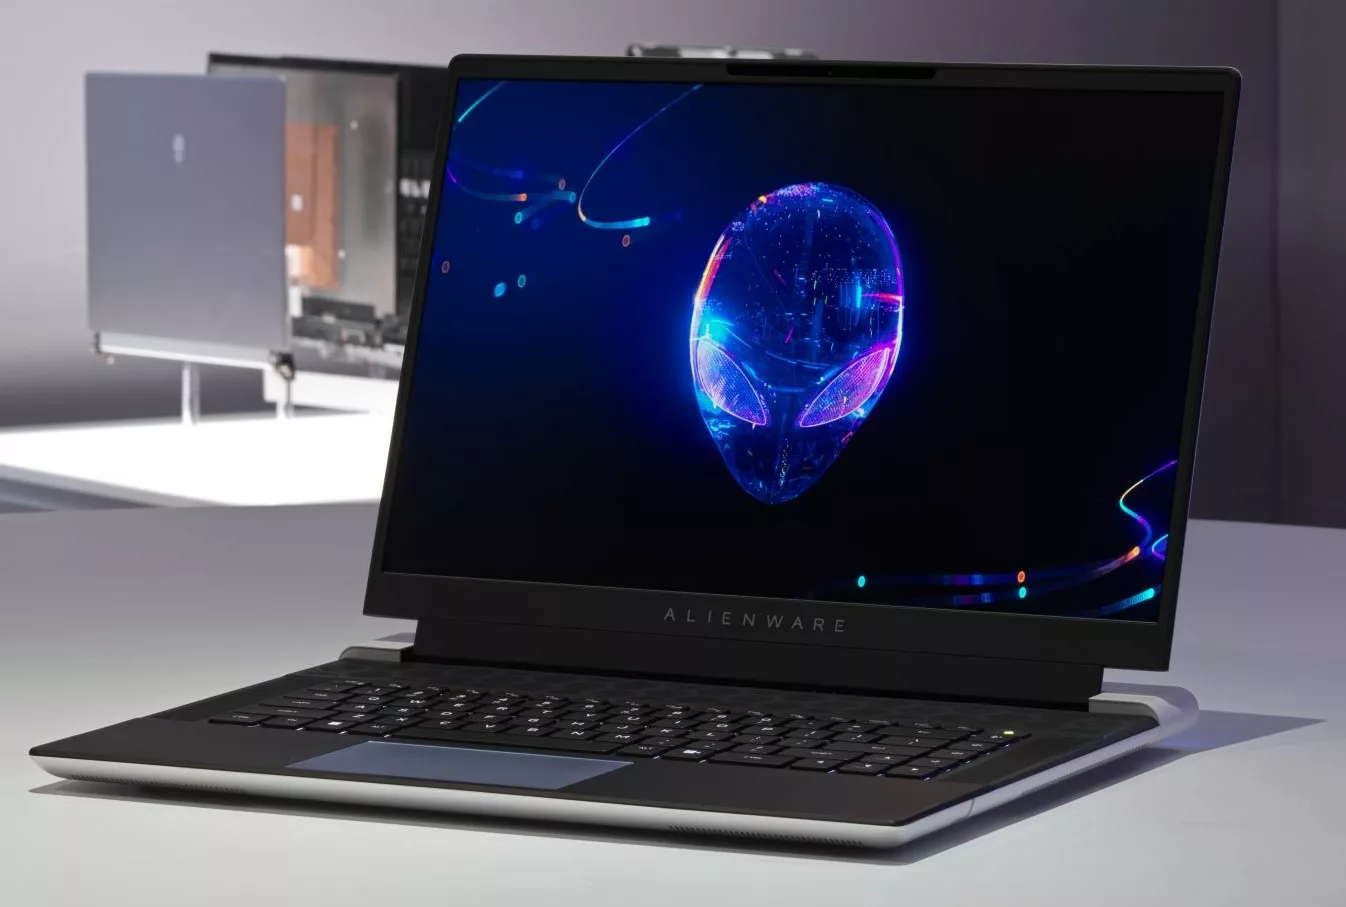 Dell’s new G-Series and Alienware laptops announced at CES 2023